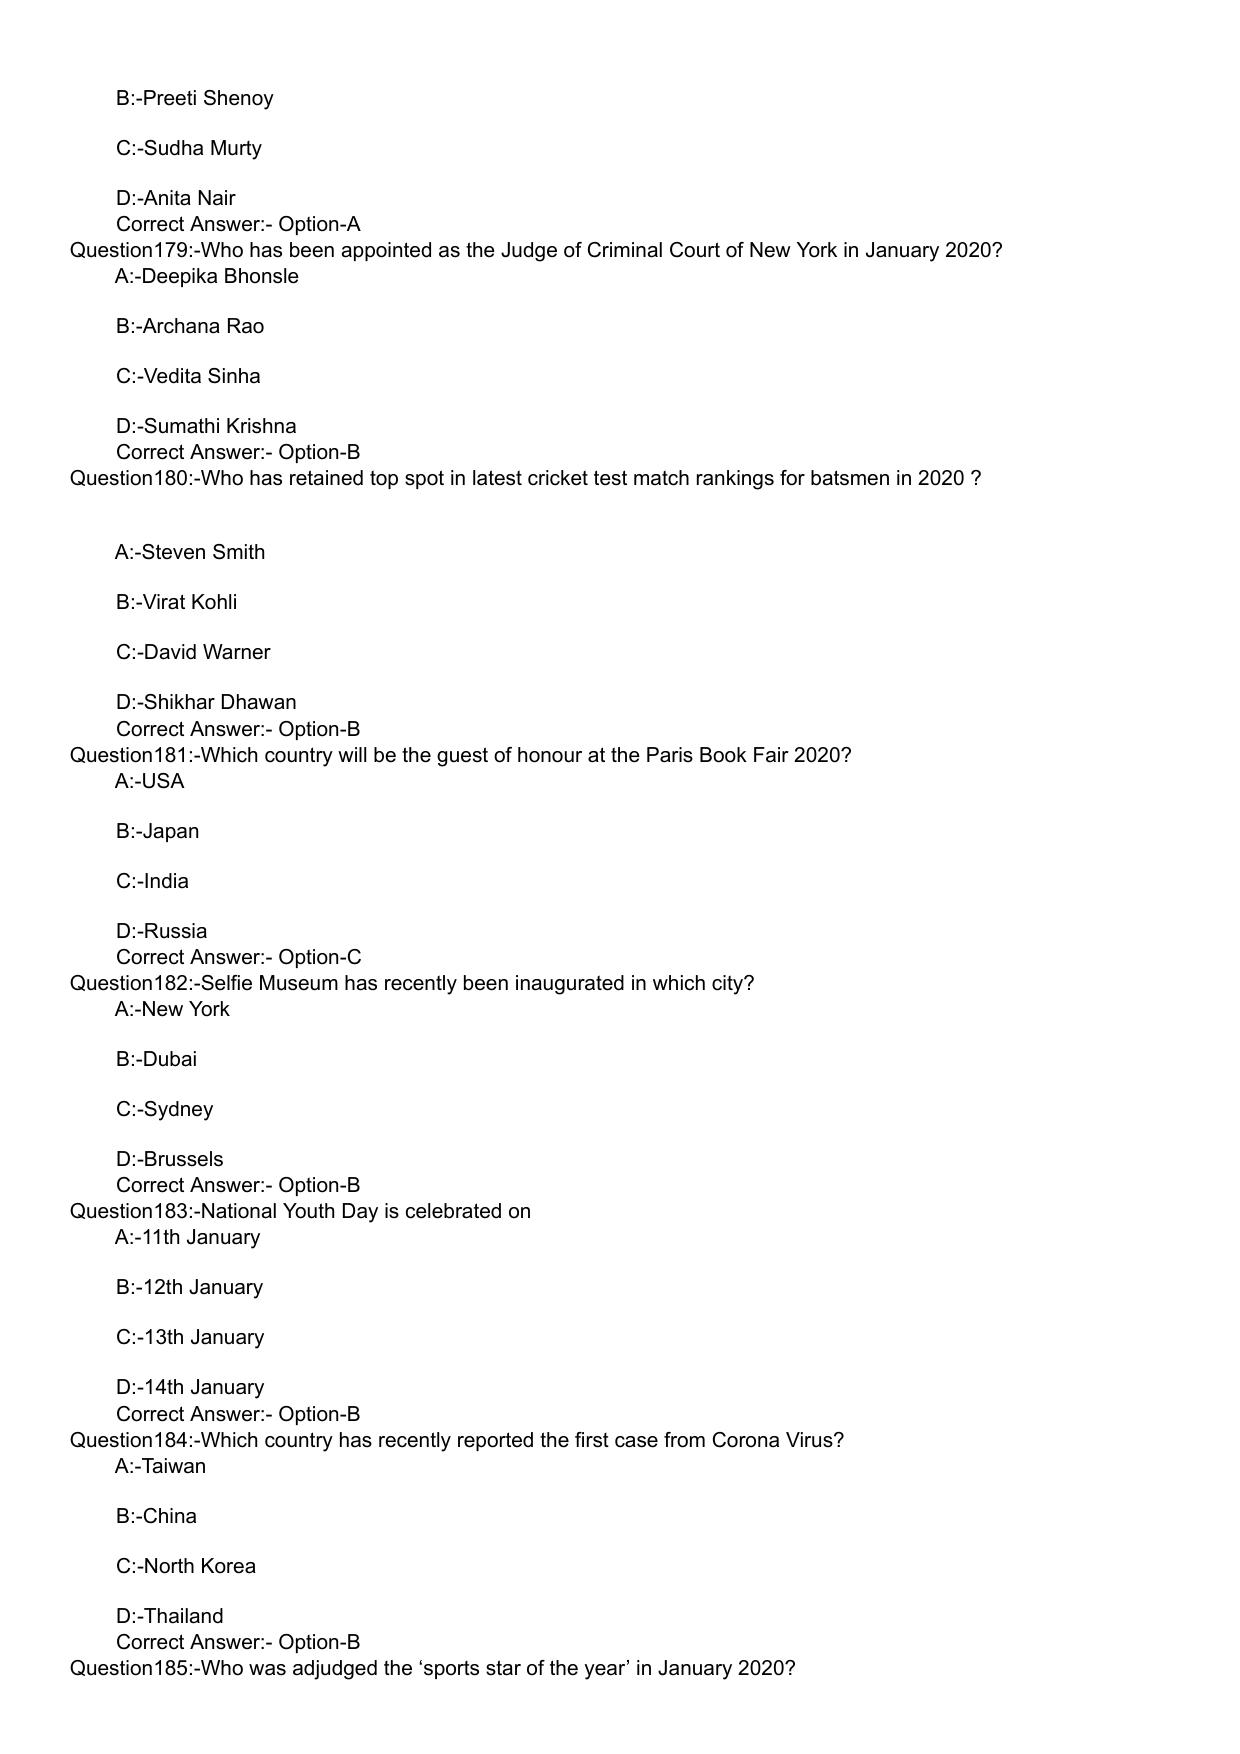 KLEE 5 Year LLB Exam 2020 Question Paper - Page 31